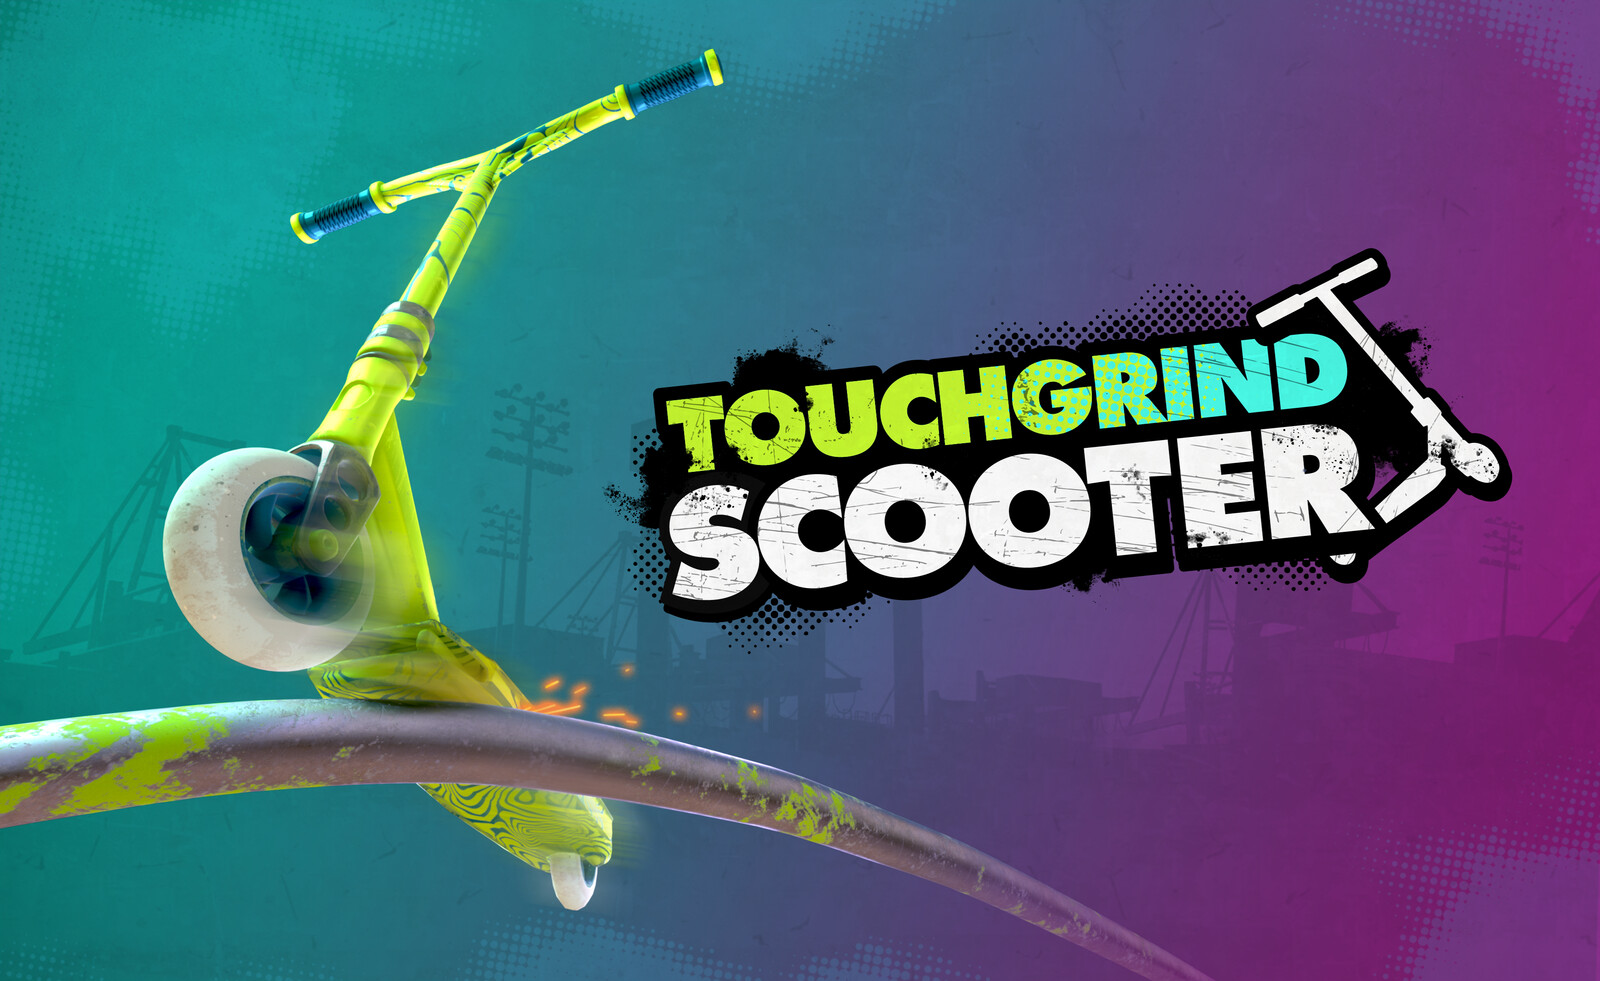 Touchgrind Scooter Promo artwork